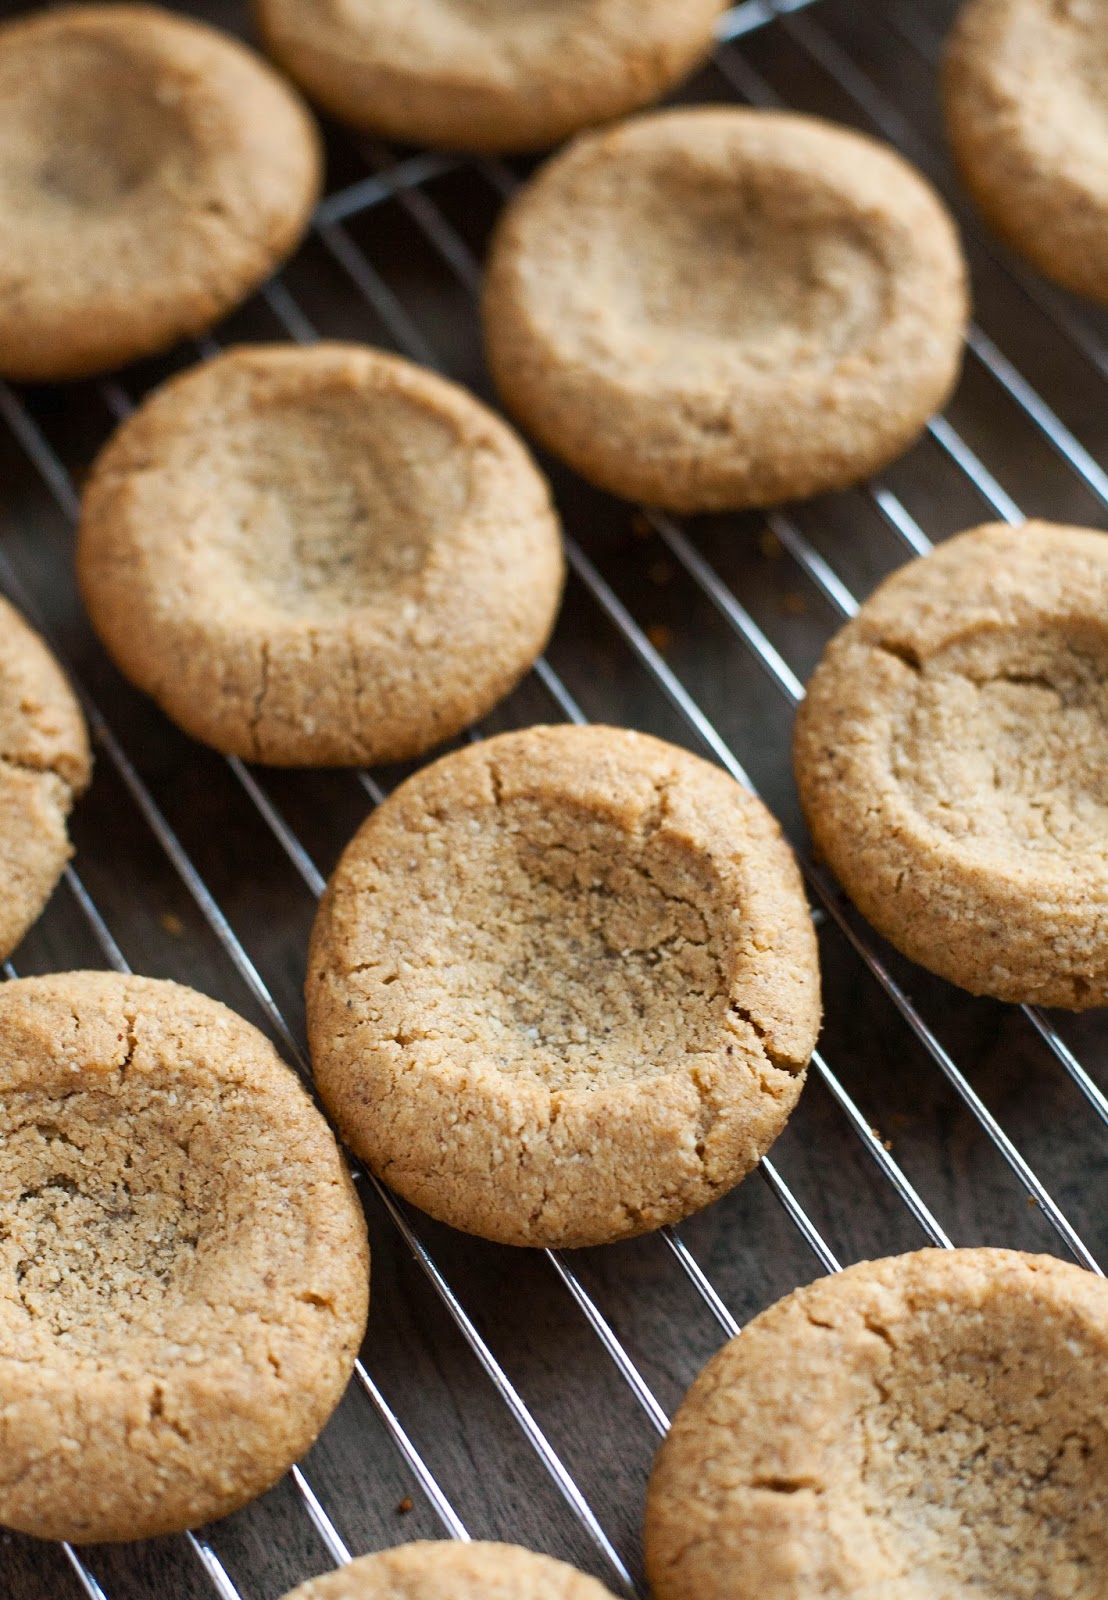 Almond Butter Thumbprints with Salted Caramel (Gluten free, Grain free) | acalculatedwhisk.com